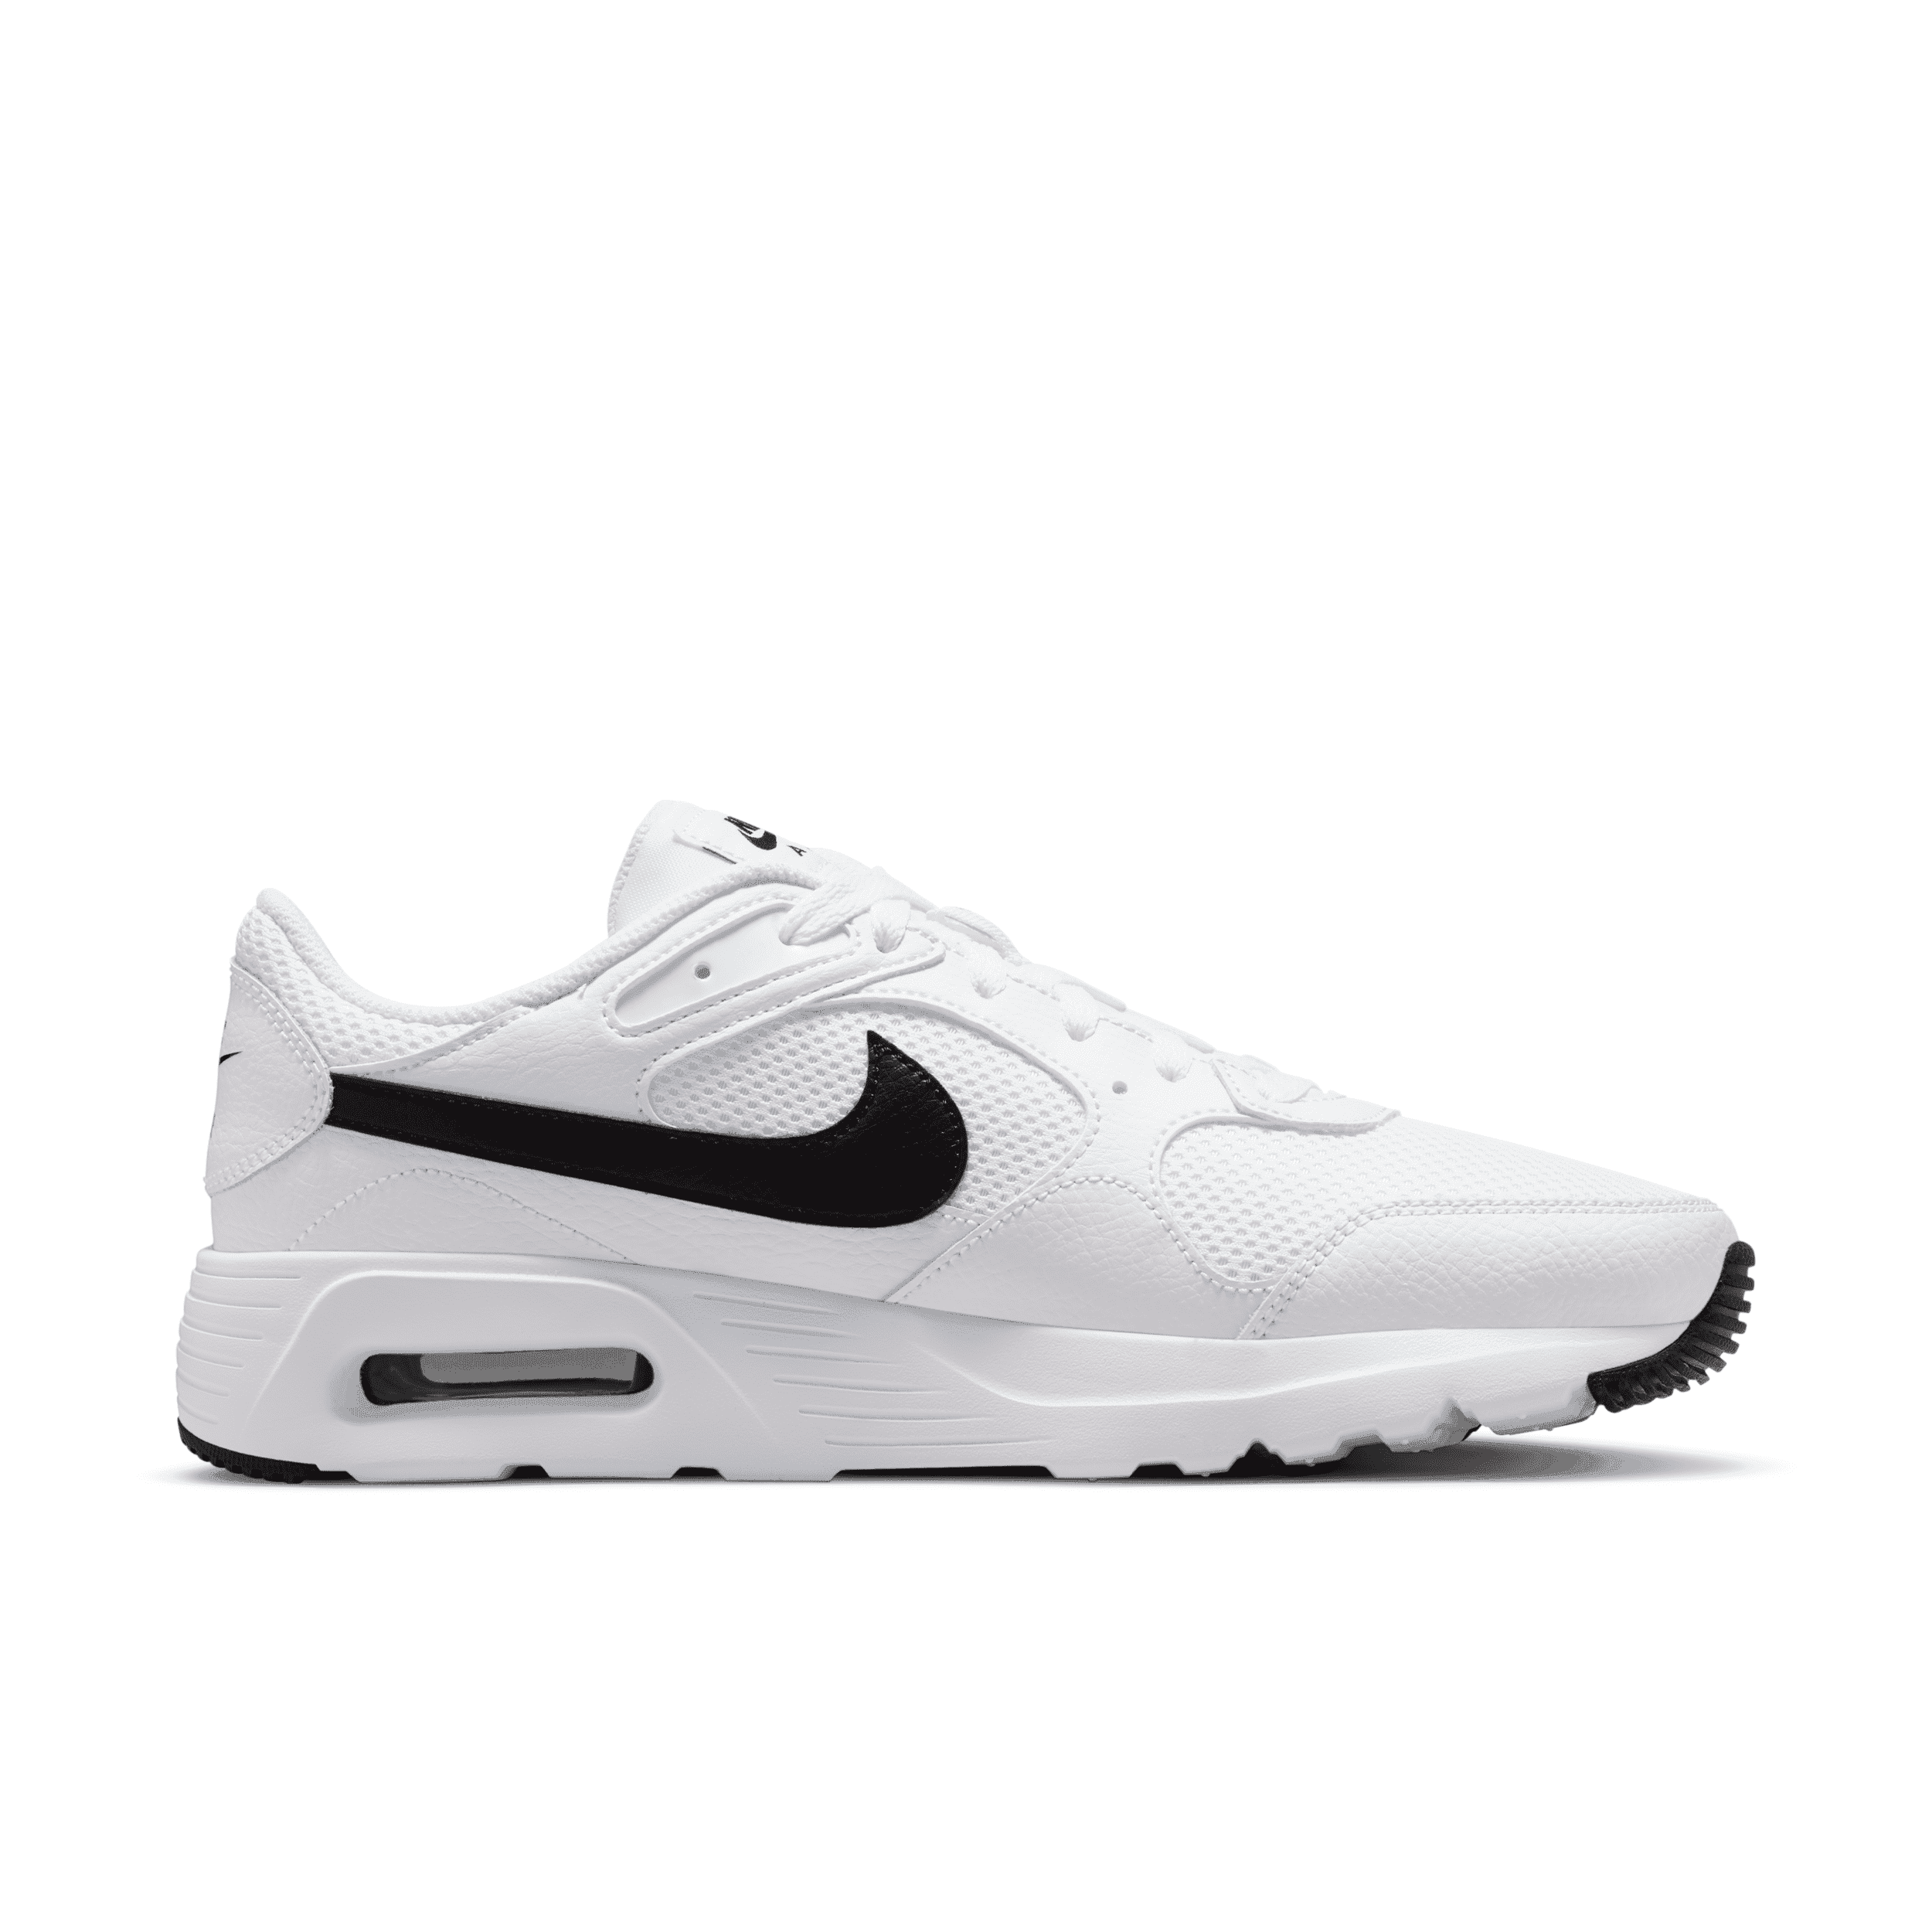 Max Nike Air Date - Release Black Raffles CW4555-102 SC White and